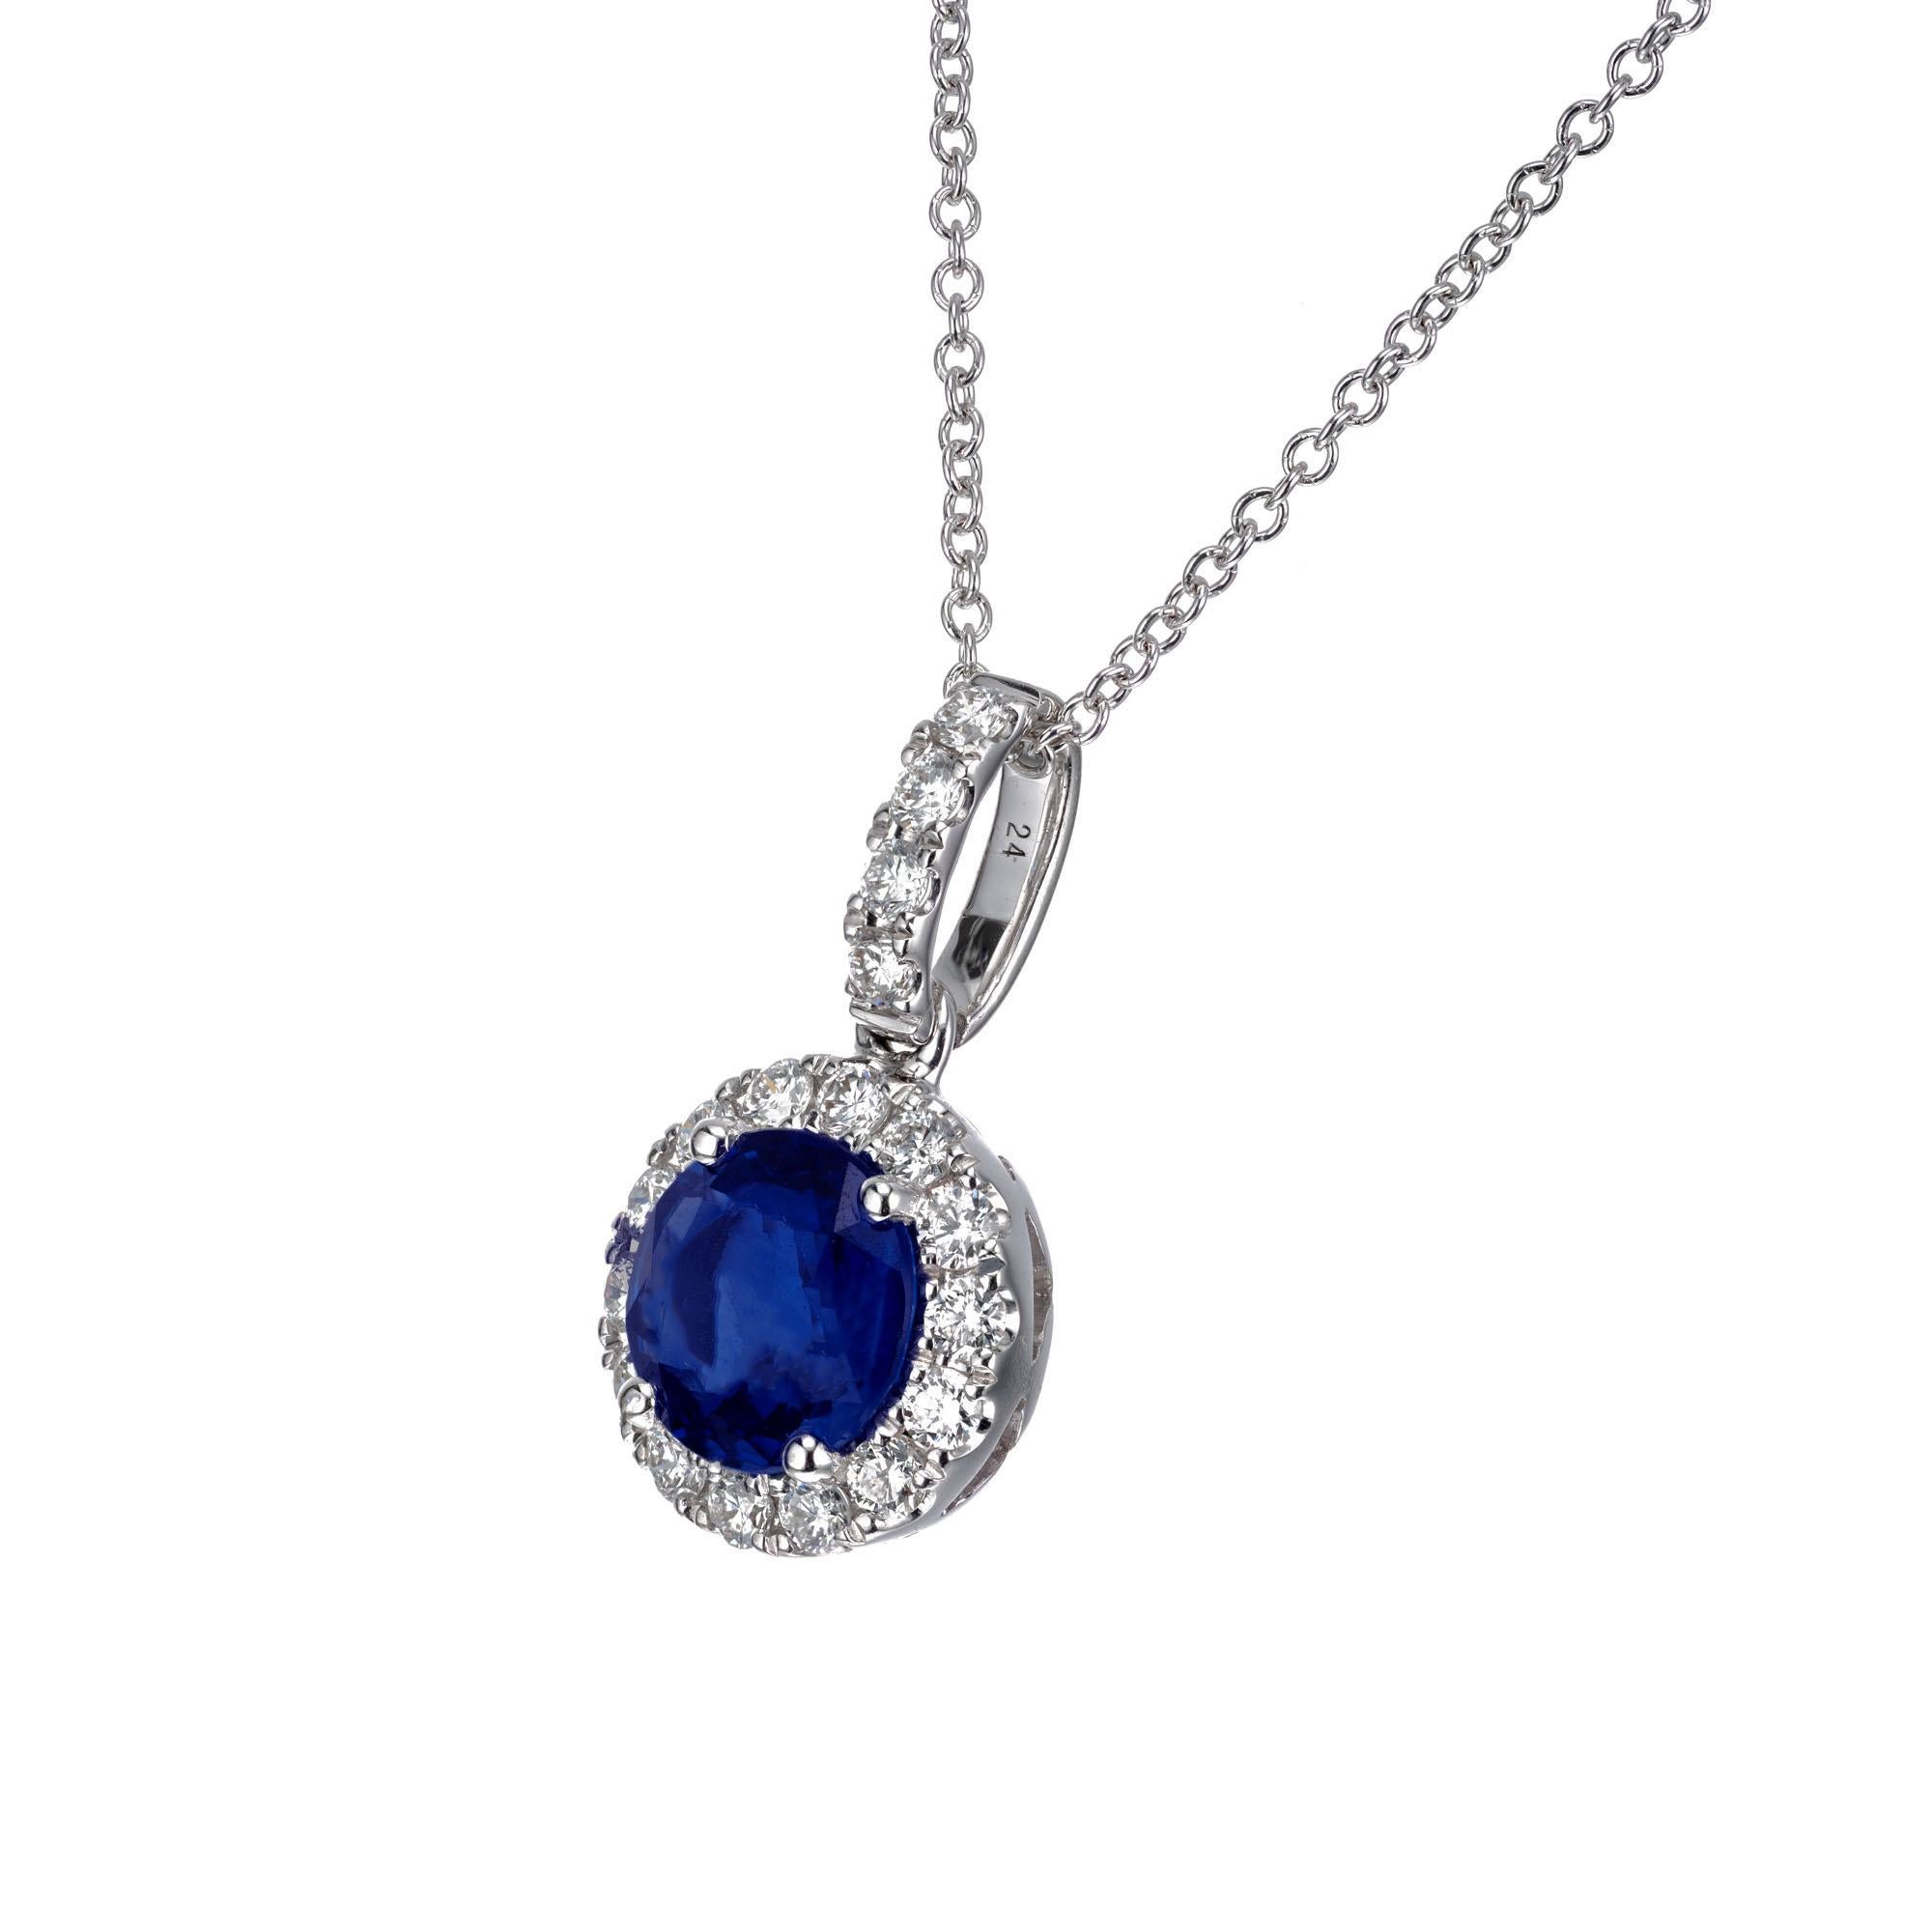 1.30 carat round Ceylon sapphire diamond halo pendant necklace. GIA certified round center sapphire with a halo of 18 diamonds. Set in 18k white gold. Crafted in the Peter Suchy Workshop.

1 round blue sapphire SI, approx. 1.30ct GIA Certificate #